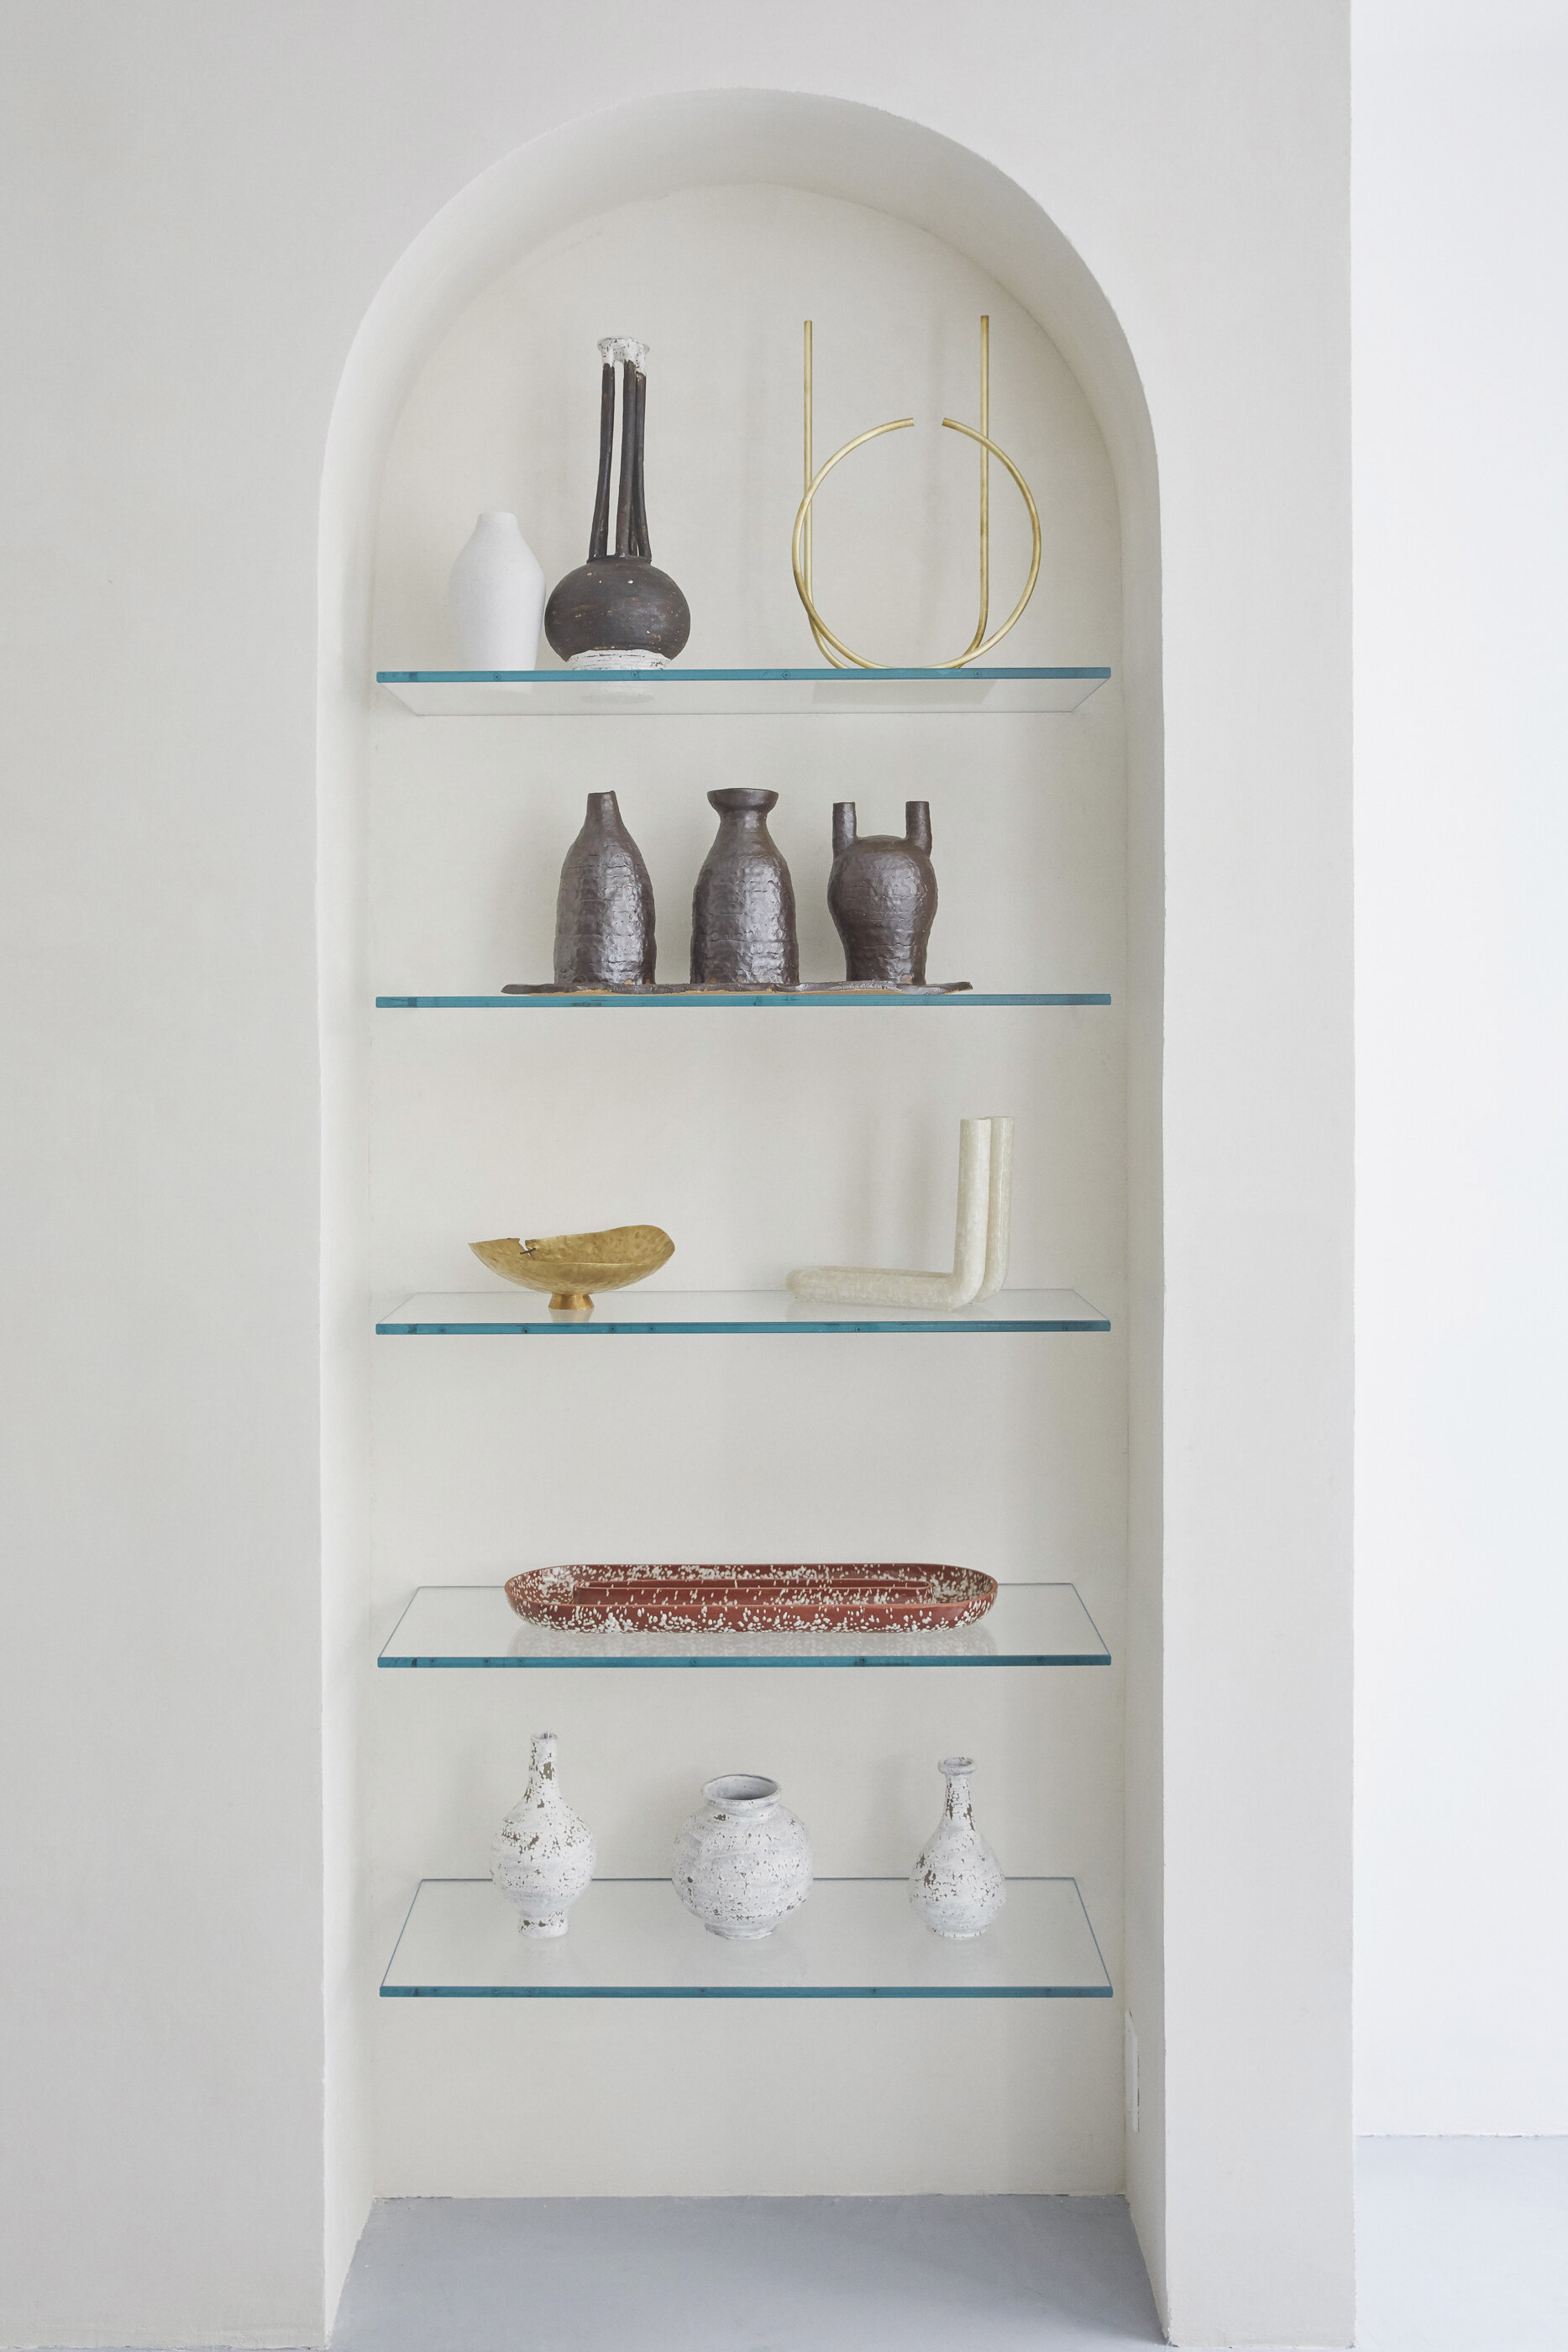 The Primary Essentials 2 Shelving